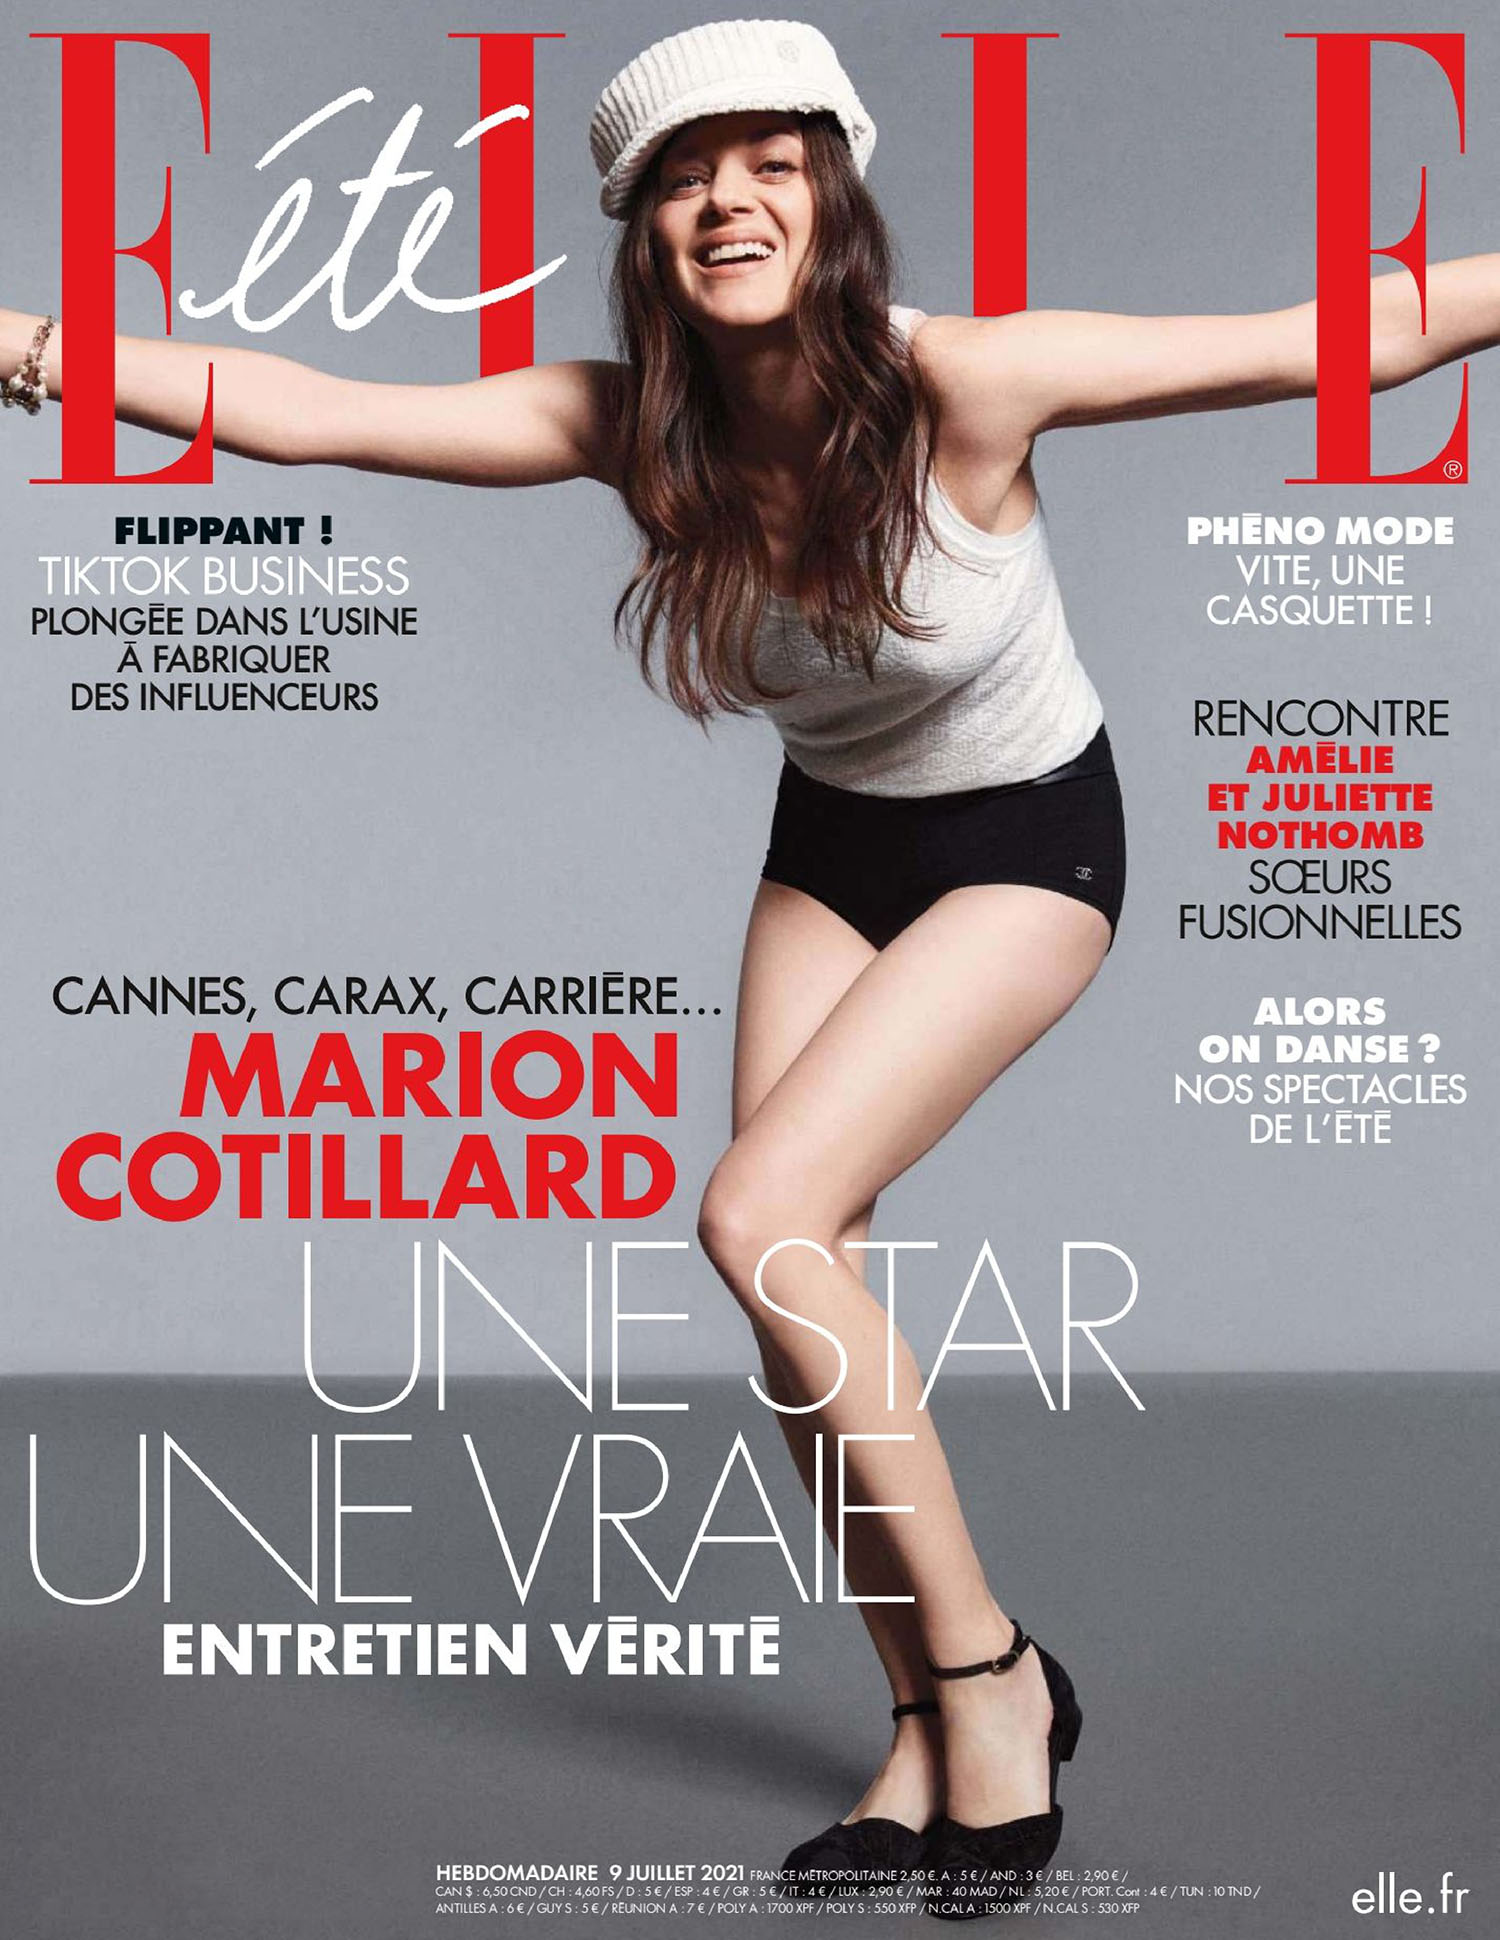 Marion Cotillard covers Elle France July 9th, 2021 by Jan Welters